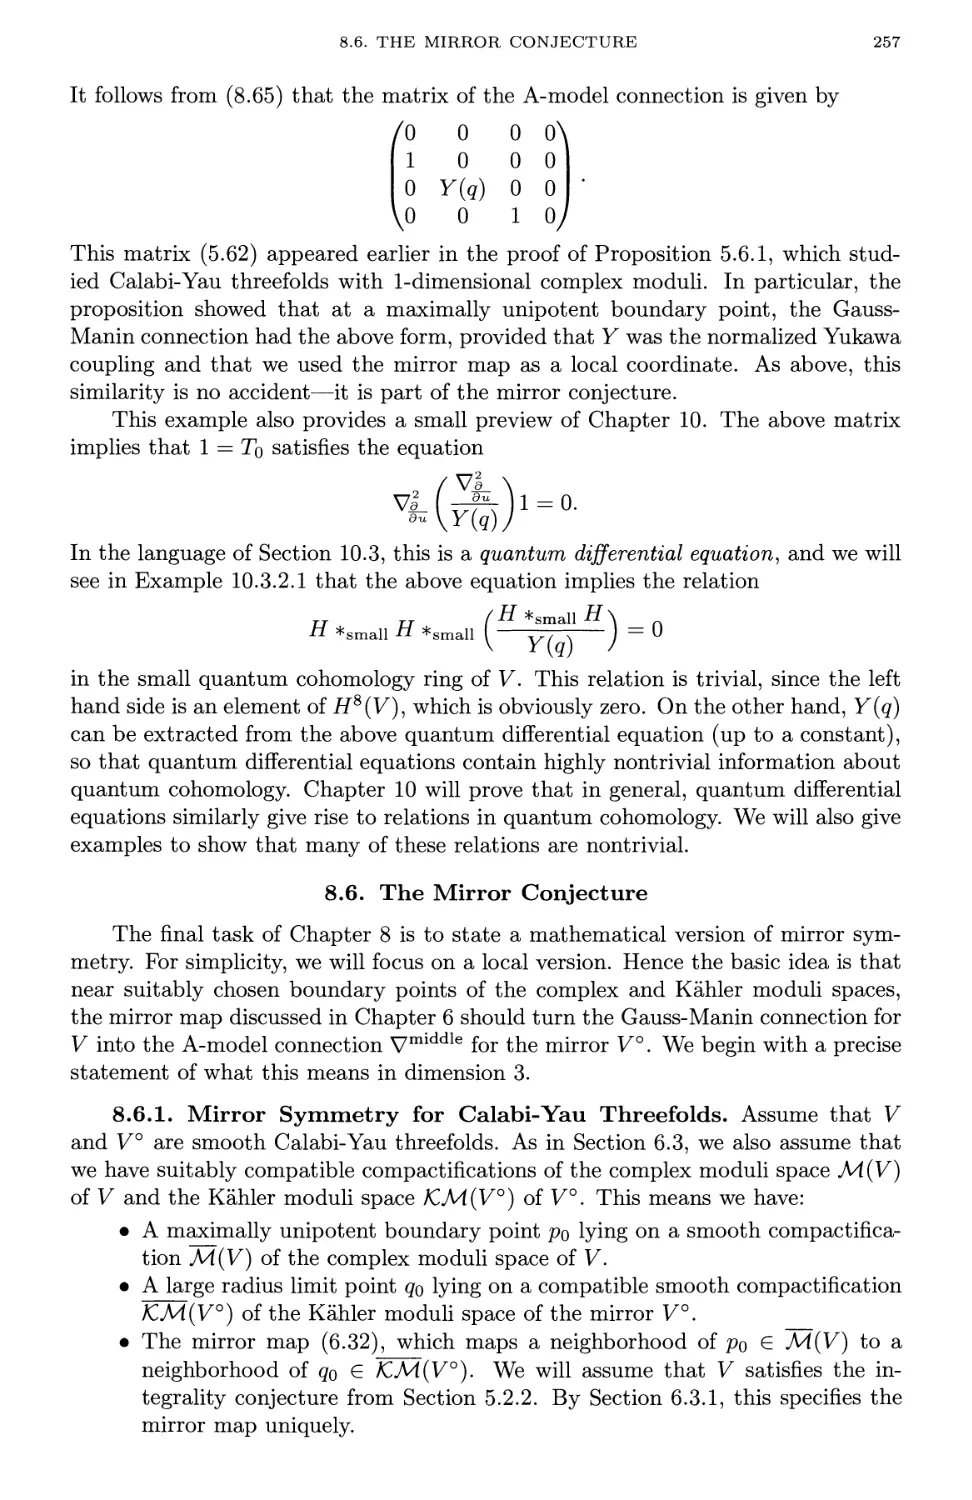 8.6. The Mirror Conjecture